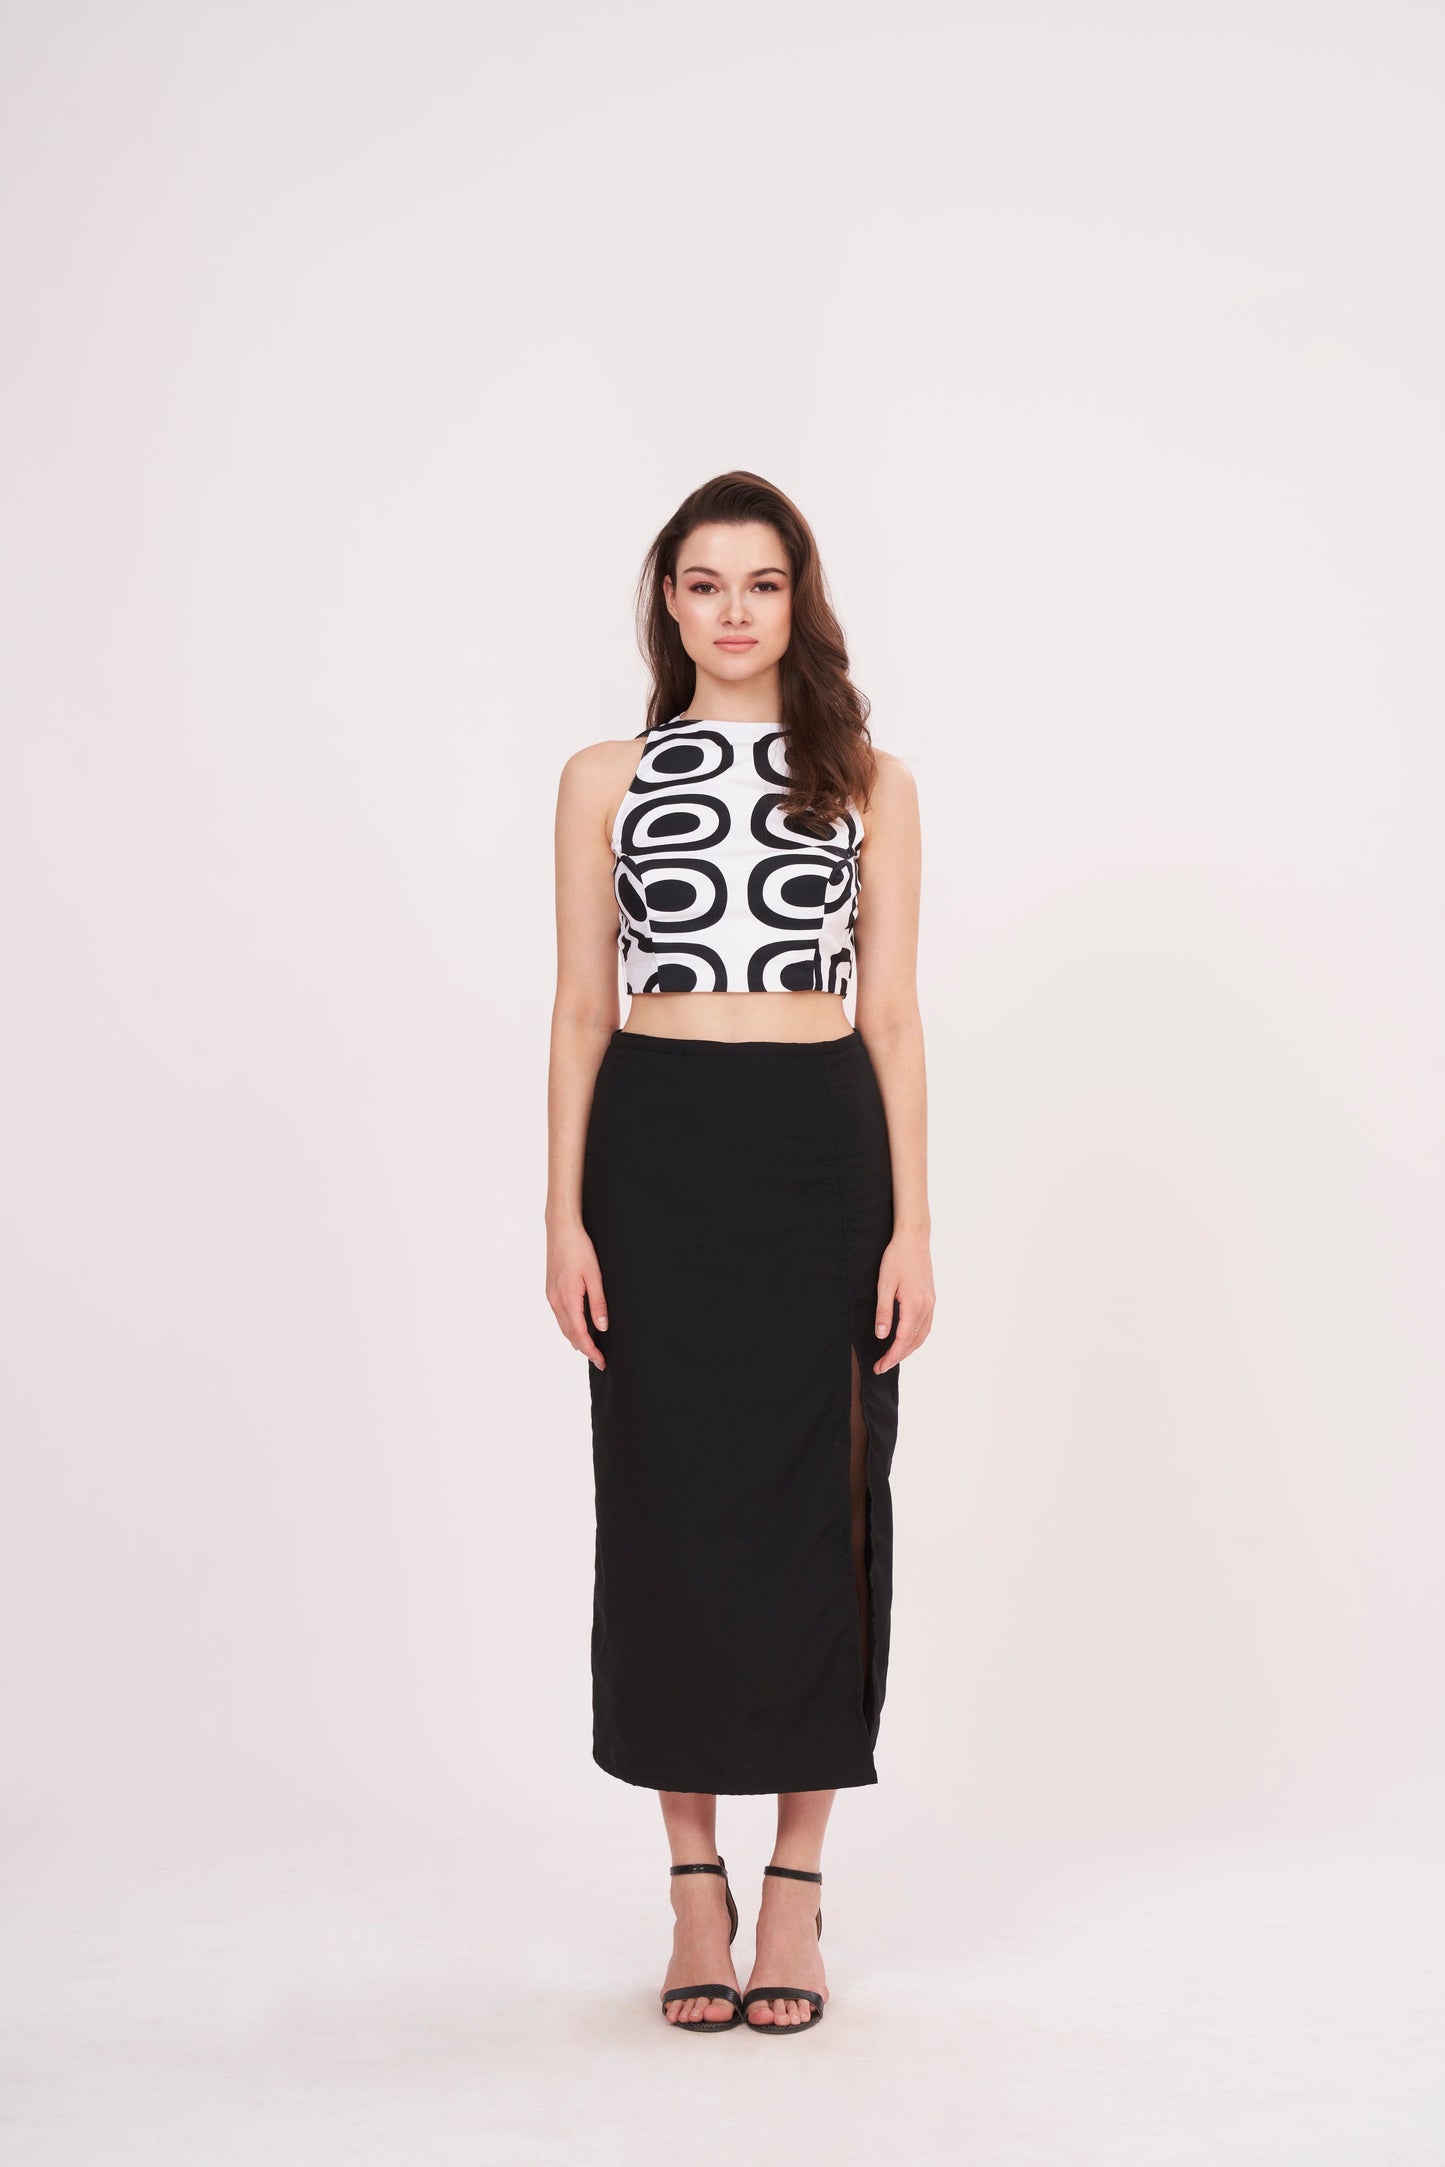 Square-shaped crop top with bold abstract print, paired with black thigh-high slit skirt for a striking ensemble